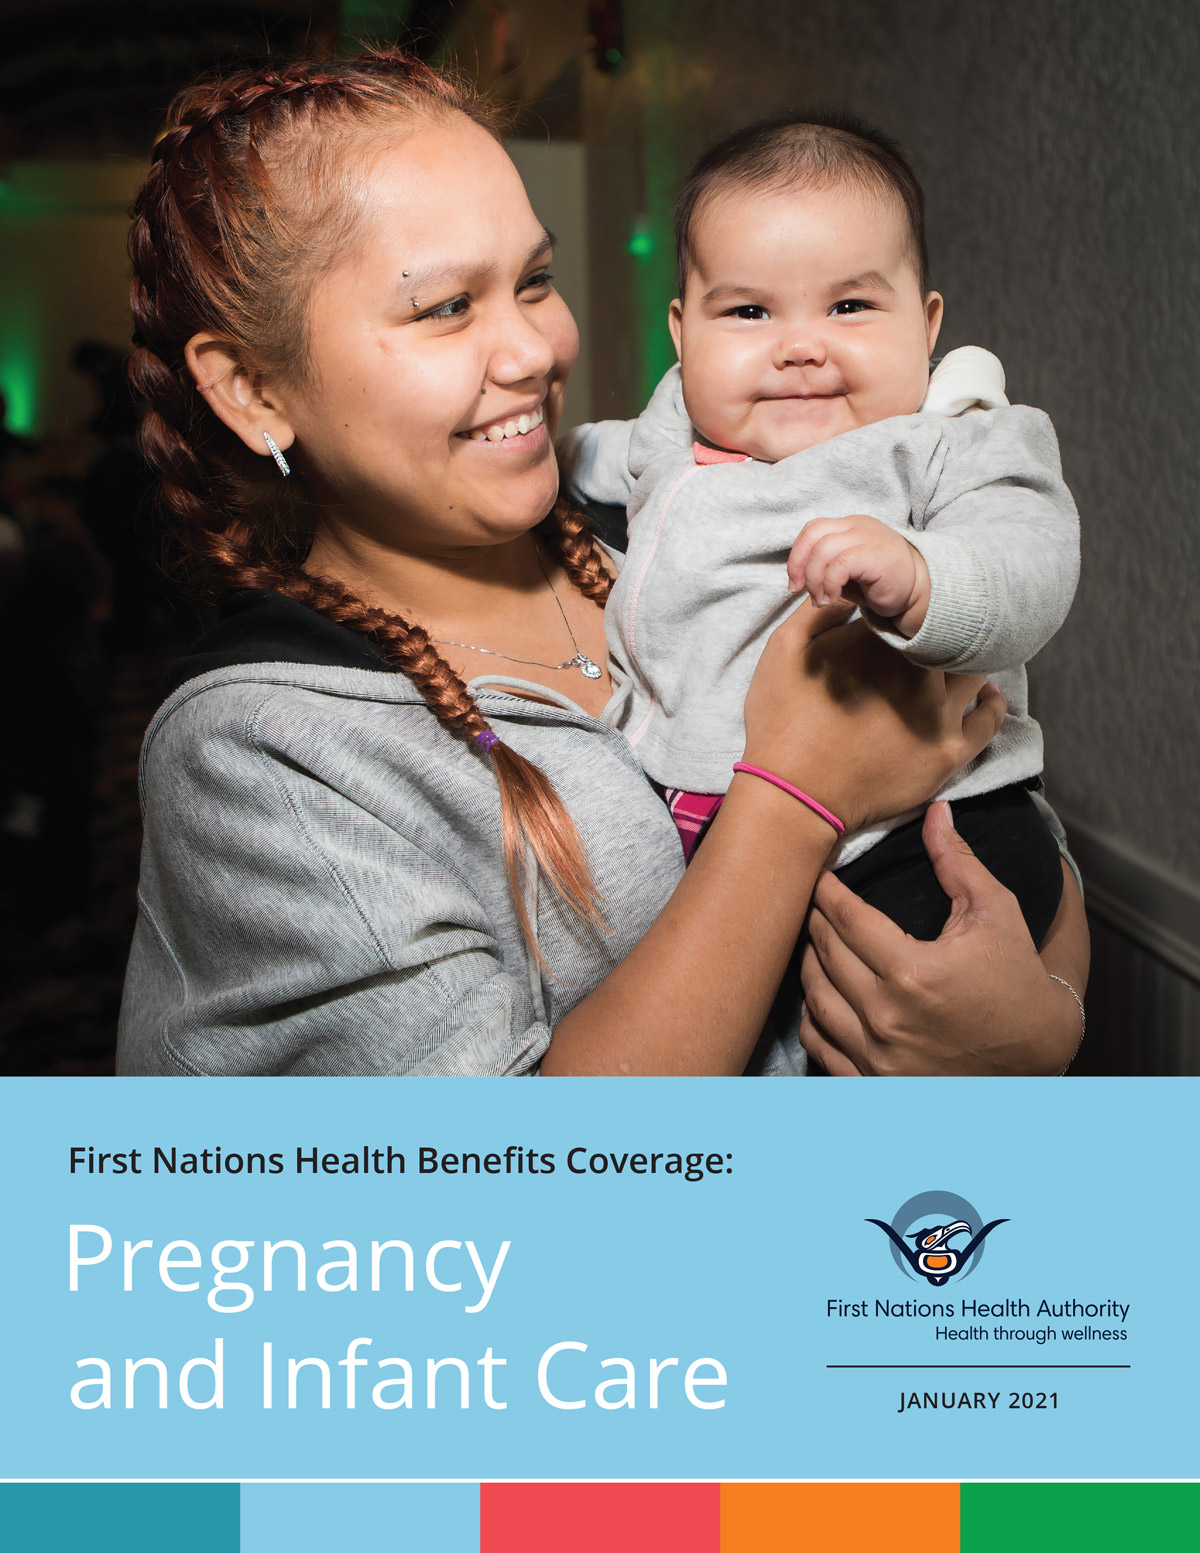 https://www.fnha.ca/BenefitsSite/HealthBenefitsNewsSite/PublishingImages/benefits/health-benefits-news/a-health-benefits-guide-to-your-pregnancy-and-infant-care/FNHA-First-Nations-Health-Benefits-Pregnancy-and-Infant-Care-Cover.jpg